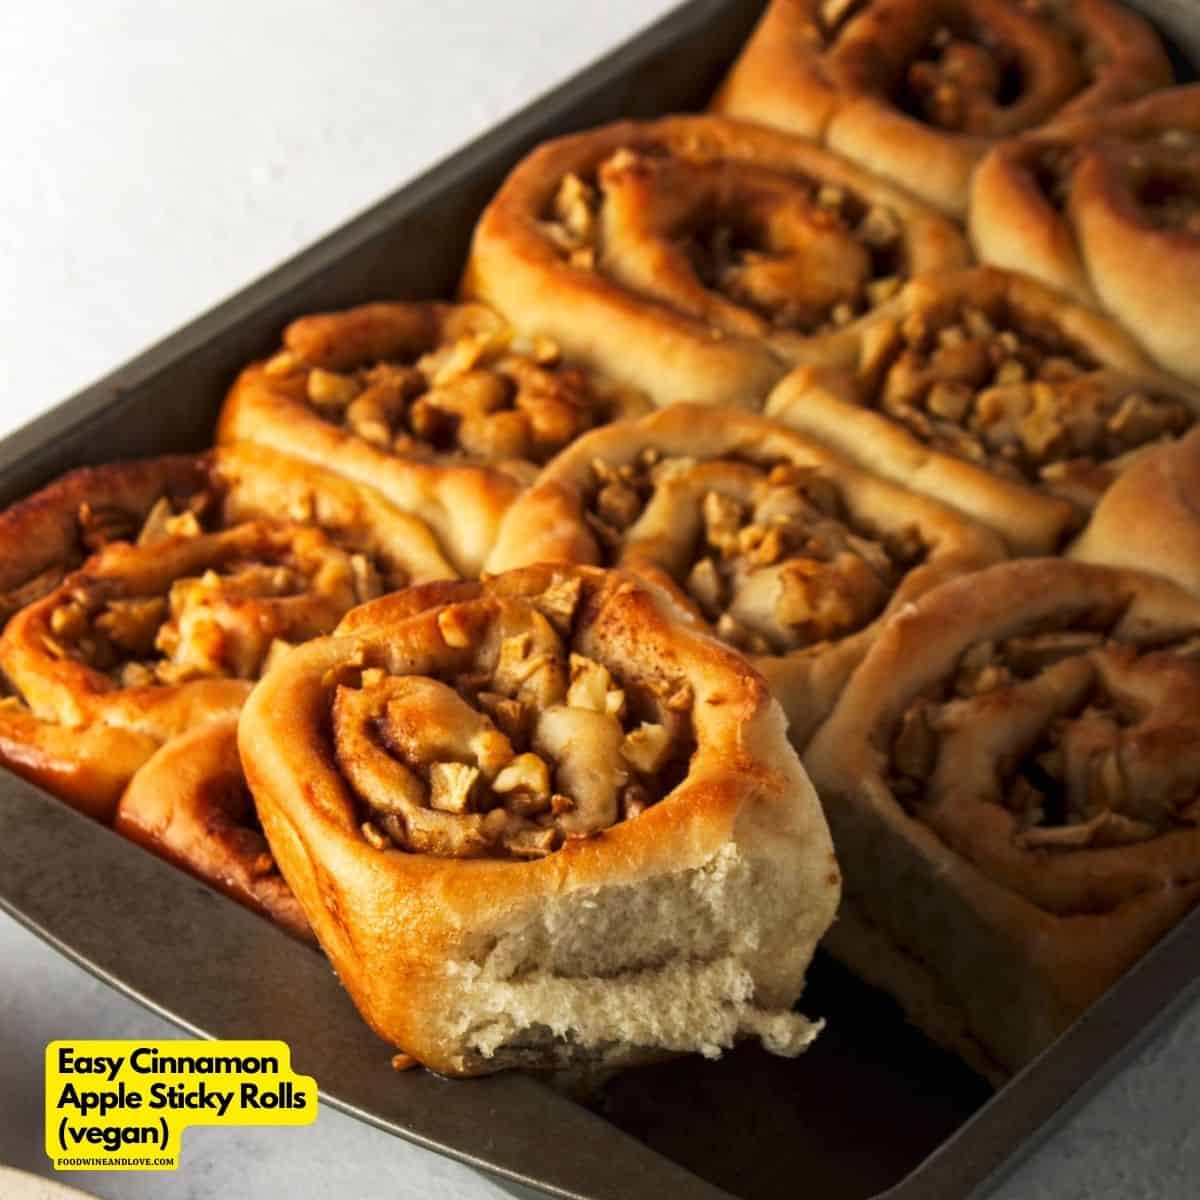 Amazing Cinnamon Apple Sticky Rolls (vegan), incredibly delicious sweet and gooey pastry buns that have no added dairy. Breakfast, brunch, dessert  